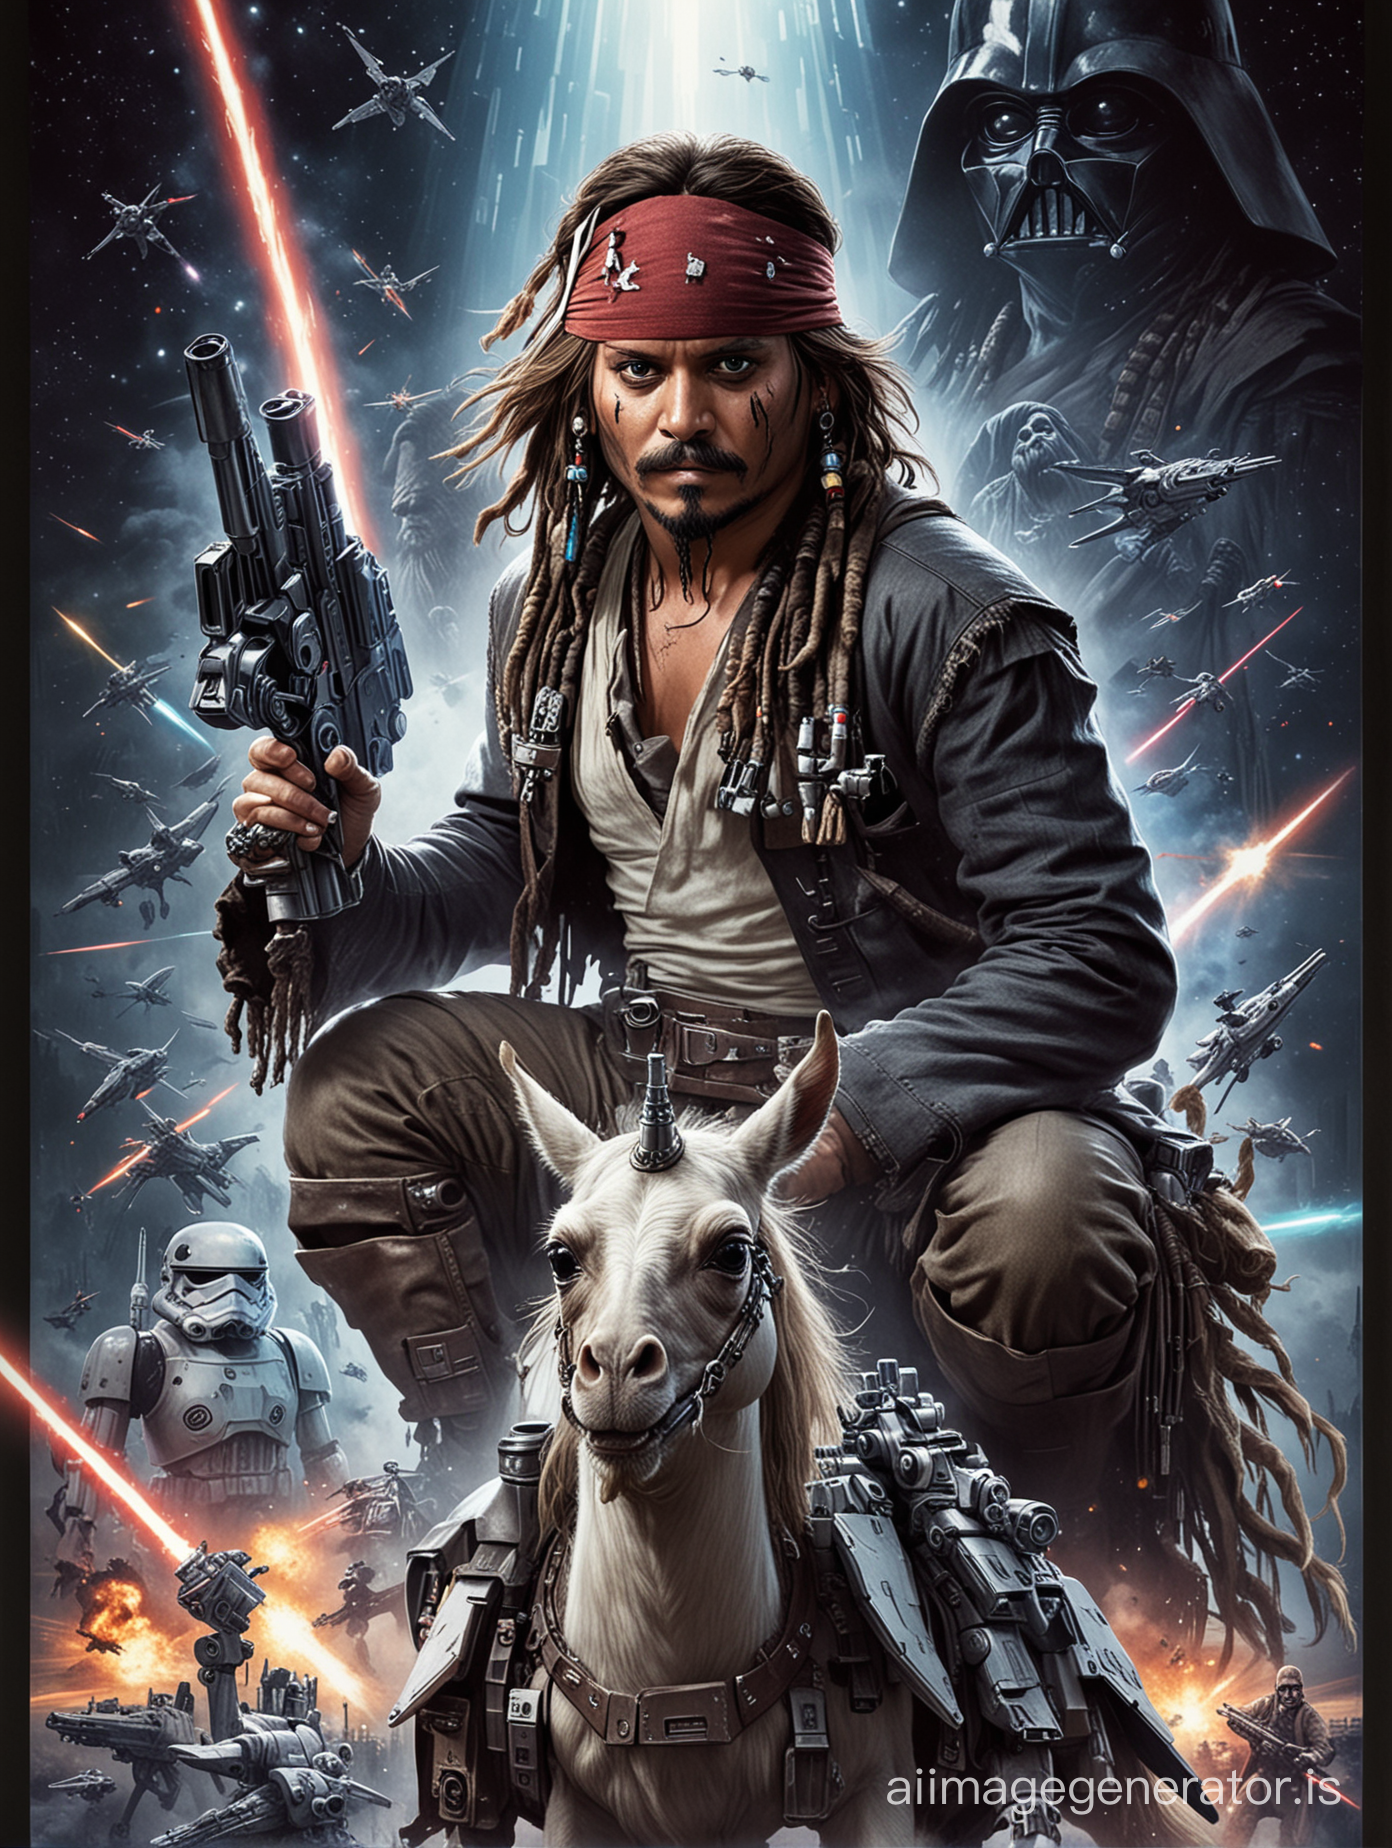 Star Wars movie poster with the caption (STAR WARS). caption (The Last Hope). Capitan jack Sparrow sitting on a robot unicorn with a laser pistol. Background Star Wars battle, death star, yoda, darth vador